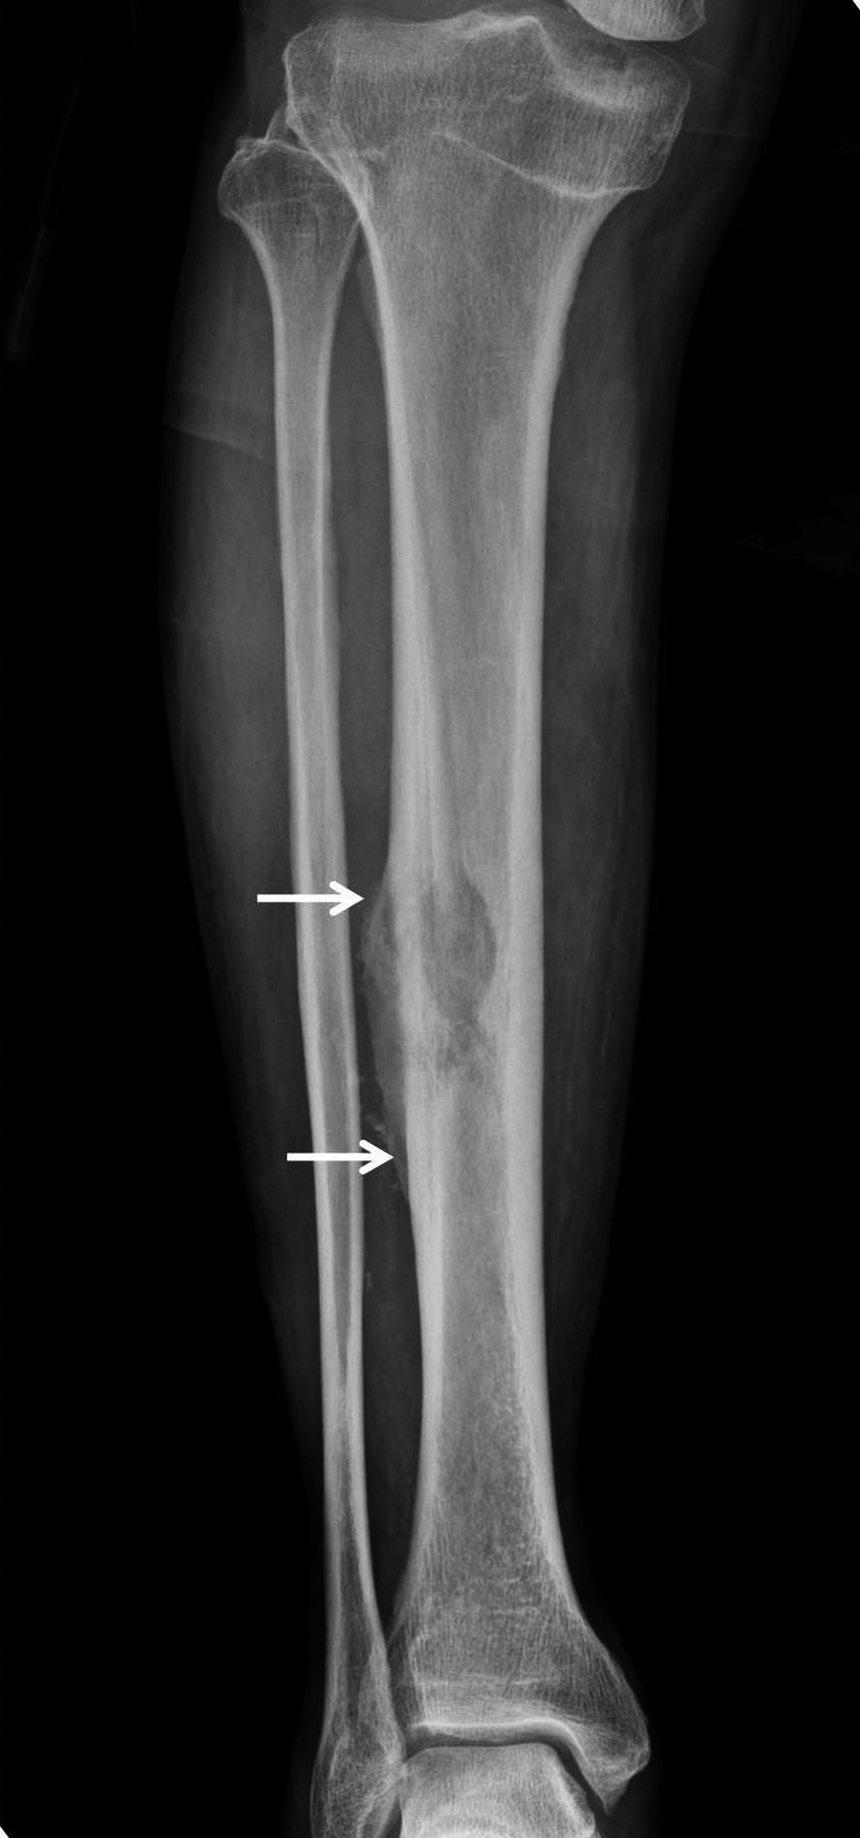 MR Findings of Squamous Cell Carcinoma rising from Chronic Osteomyelitis of the Tibia or amputation (1, 4). The findings of plain radiography are relatively well-described in the literature.